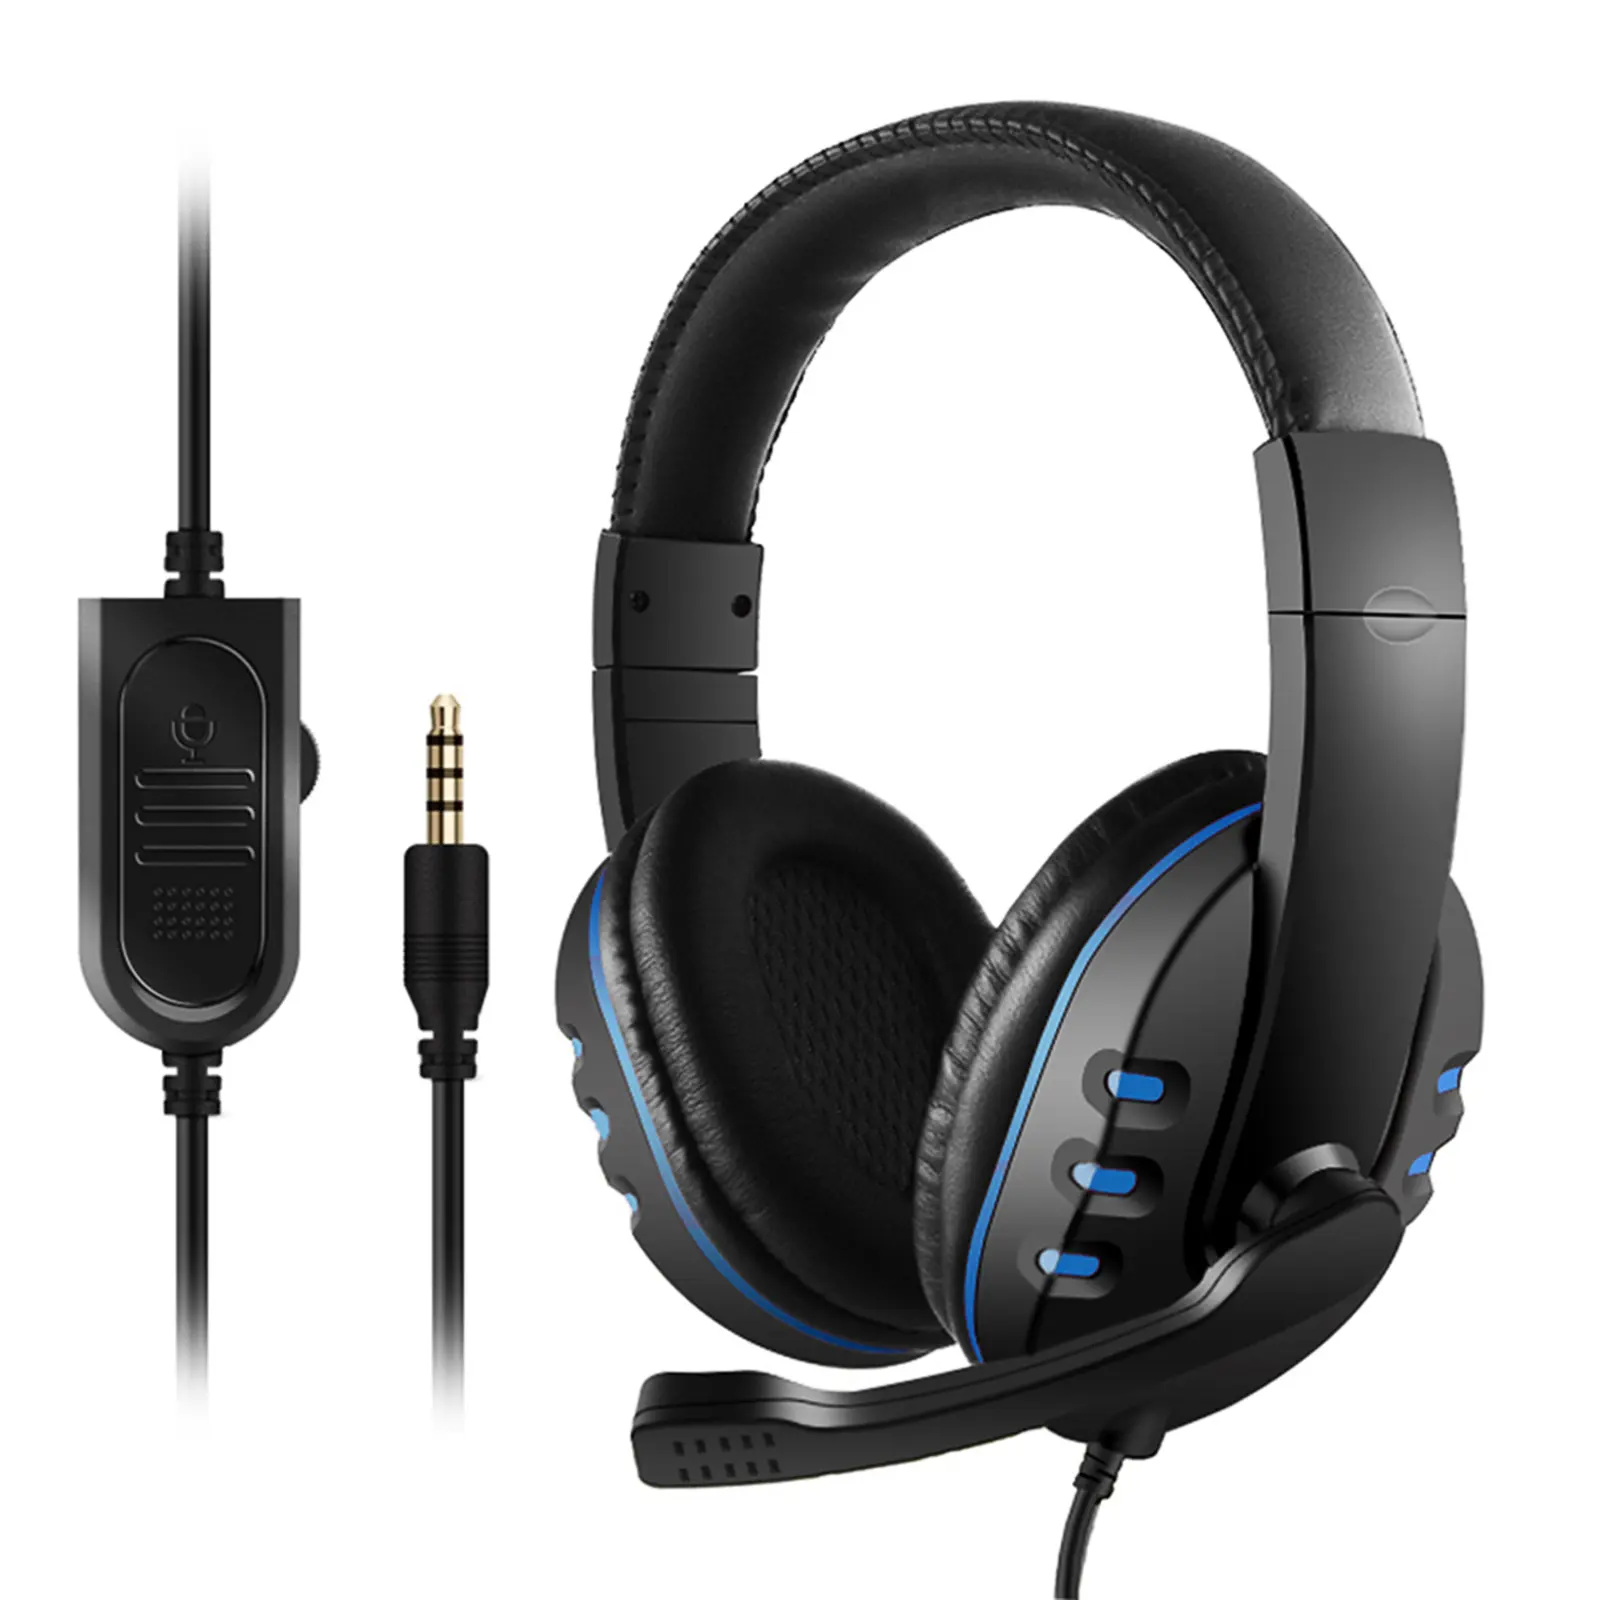 3.5mm Wired Gaming Headphones Over Ear Game Headset Noise Canceling Earphone + Microphone